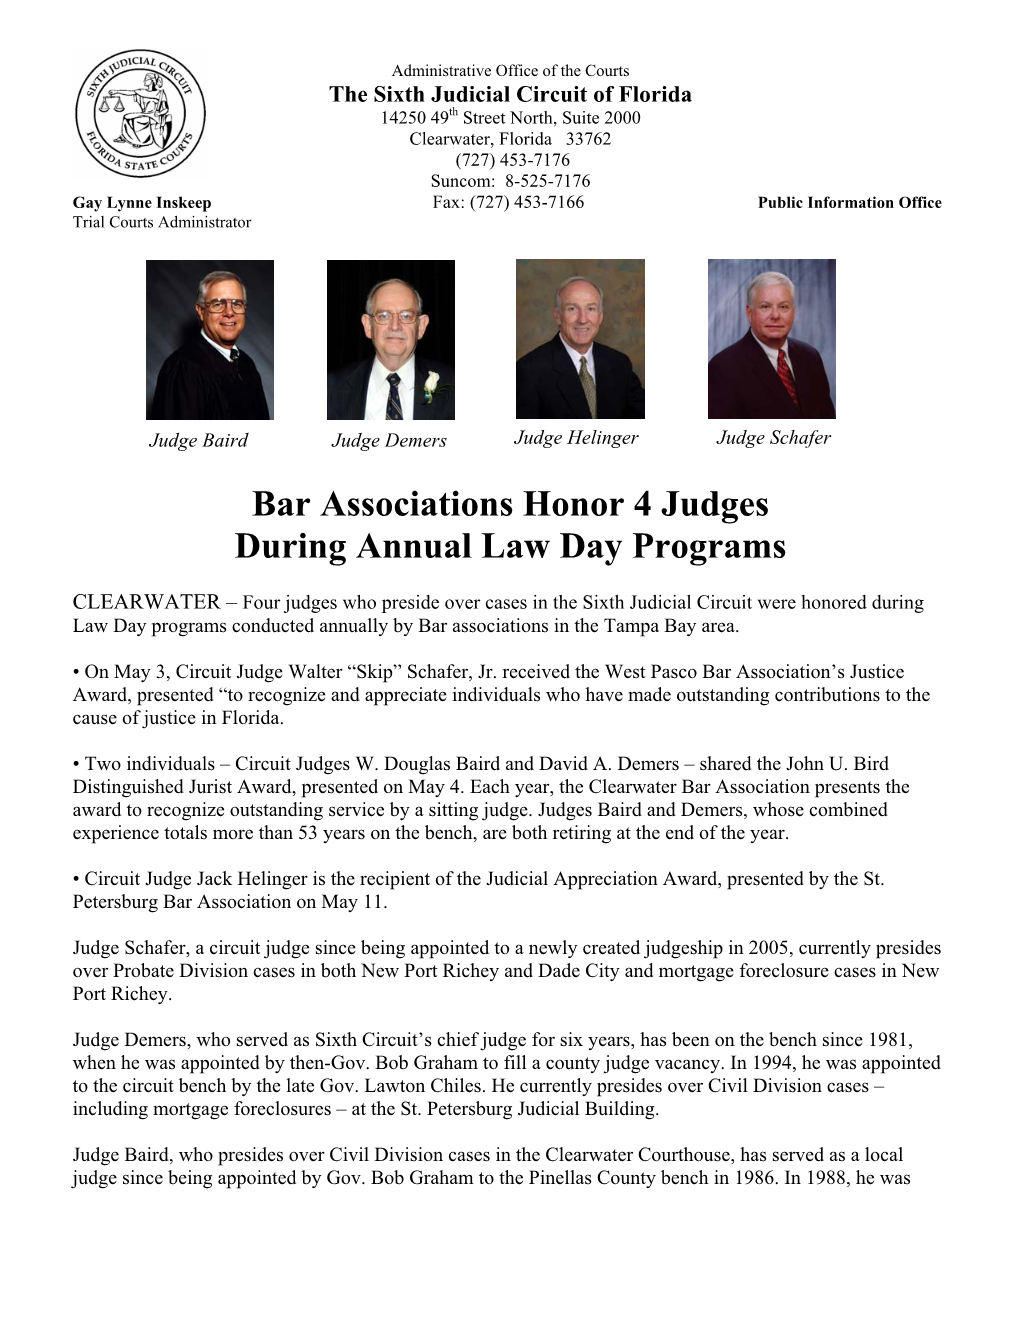 Bar Associations Honor 4 Judges During Annual Law Day Programs